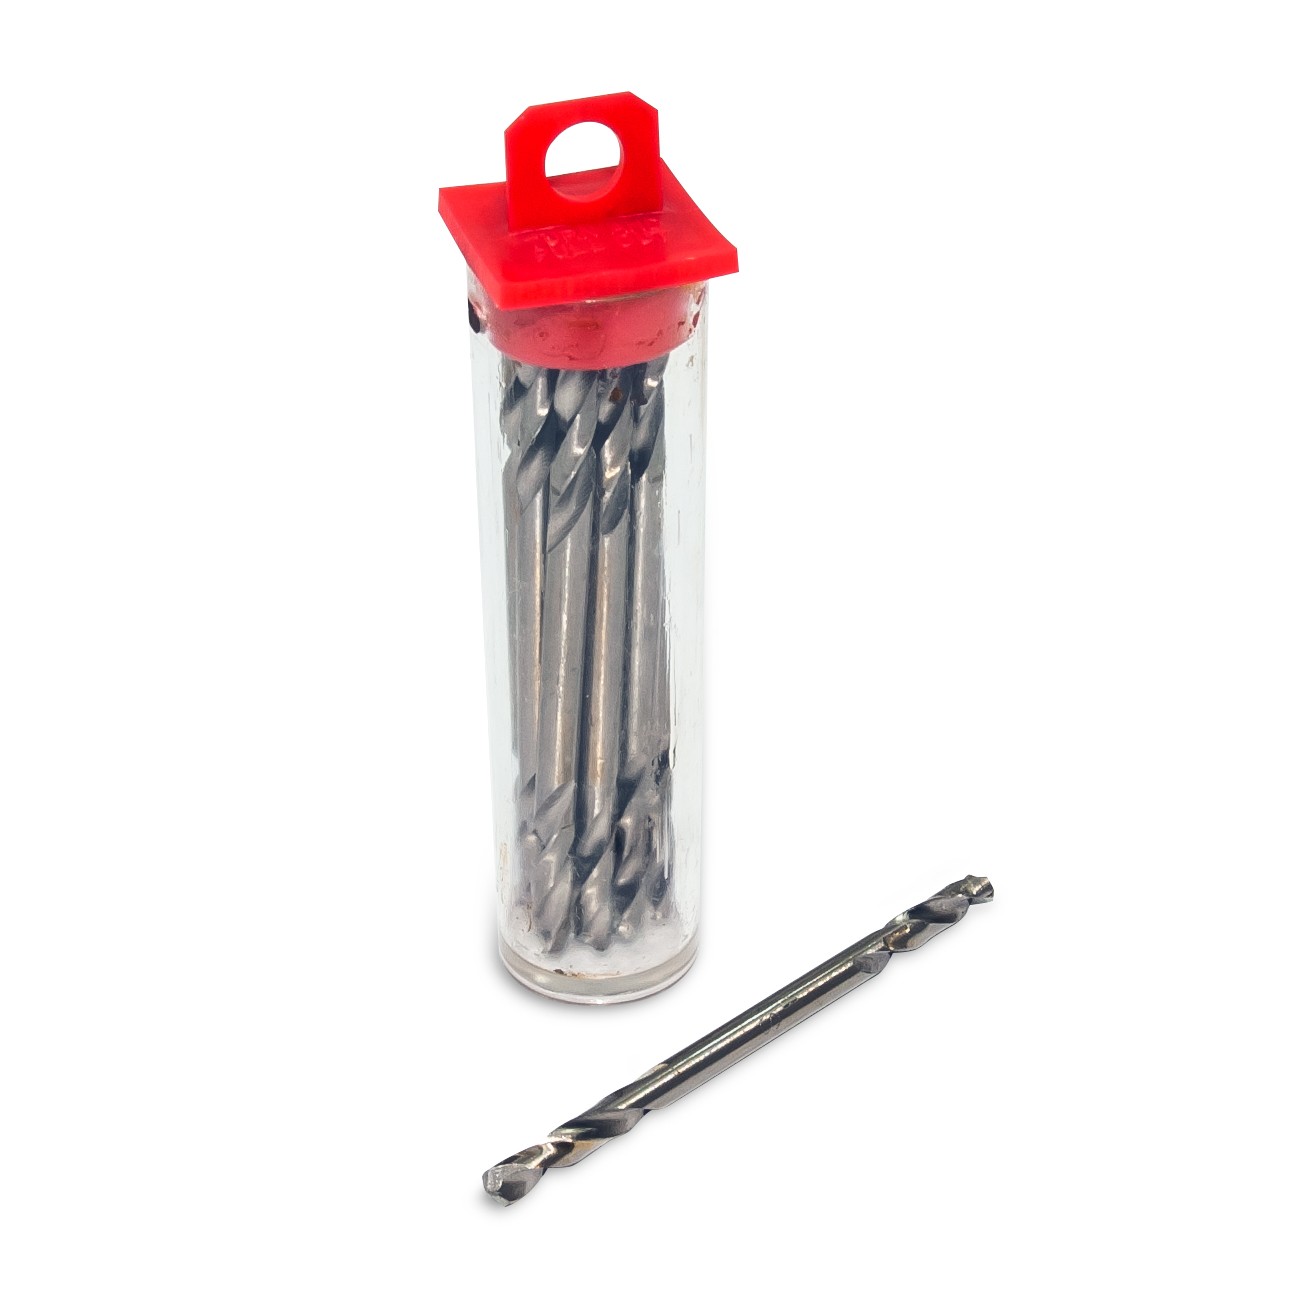 1/8" Double-ended High Speed Steel Stubby Drill Bits, 12 Bits per Tube, 12 tubes per Box